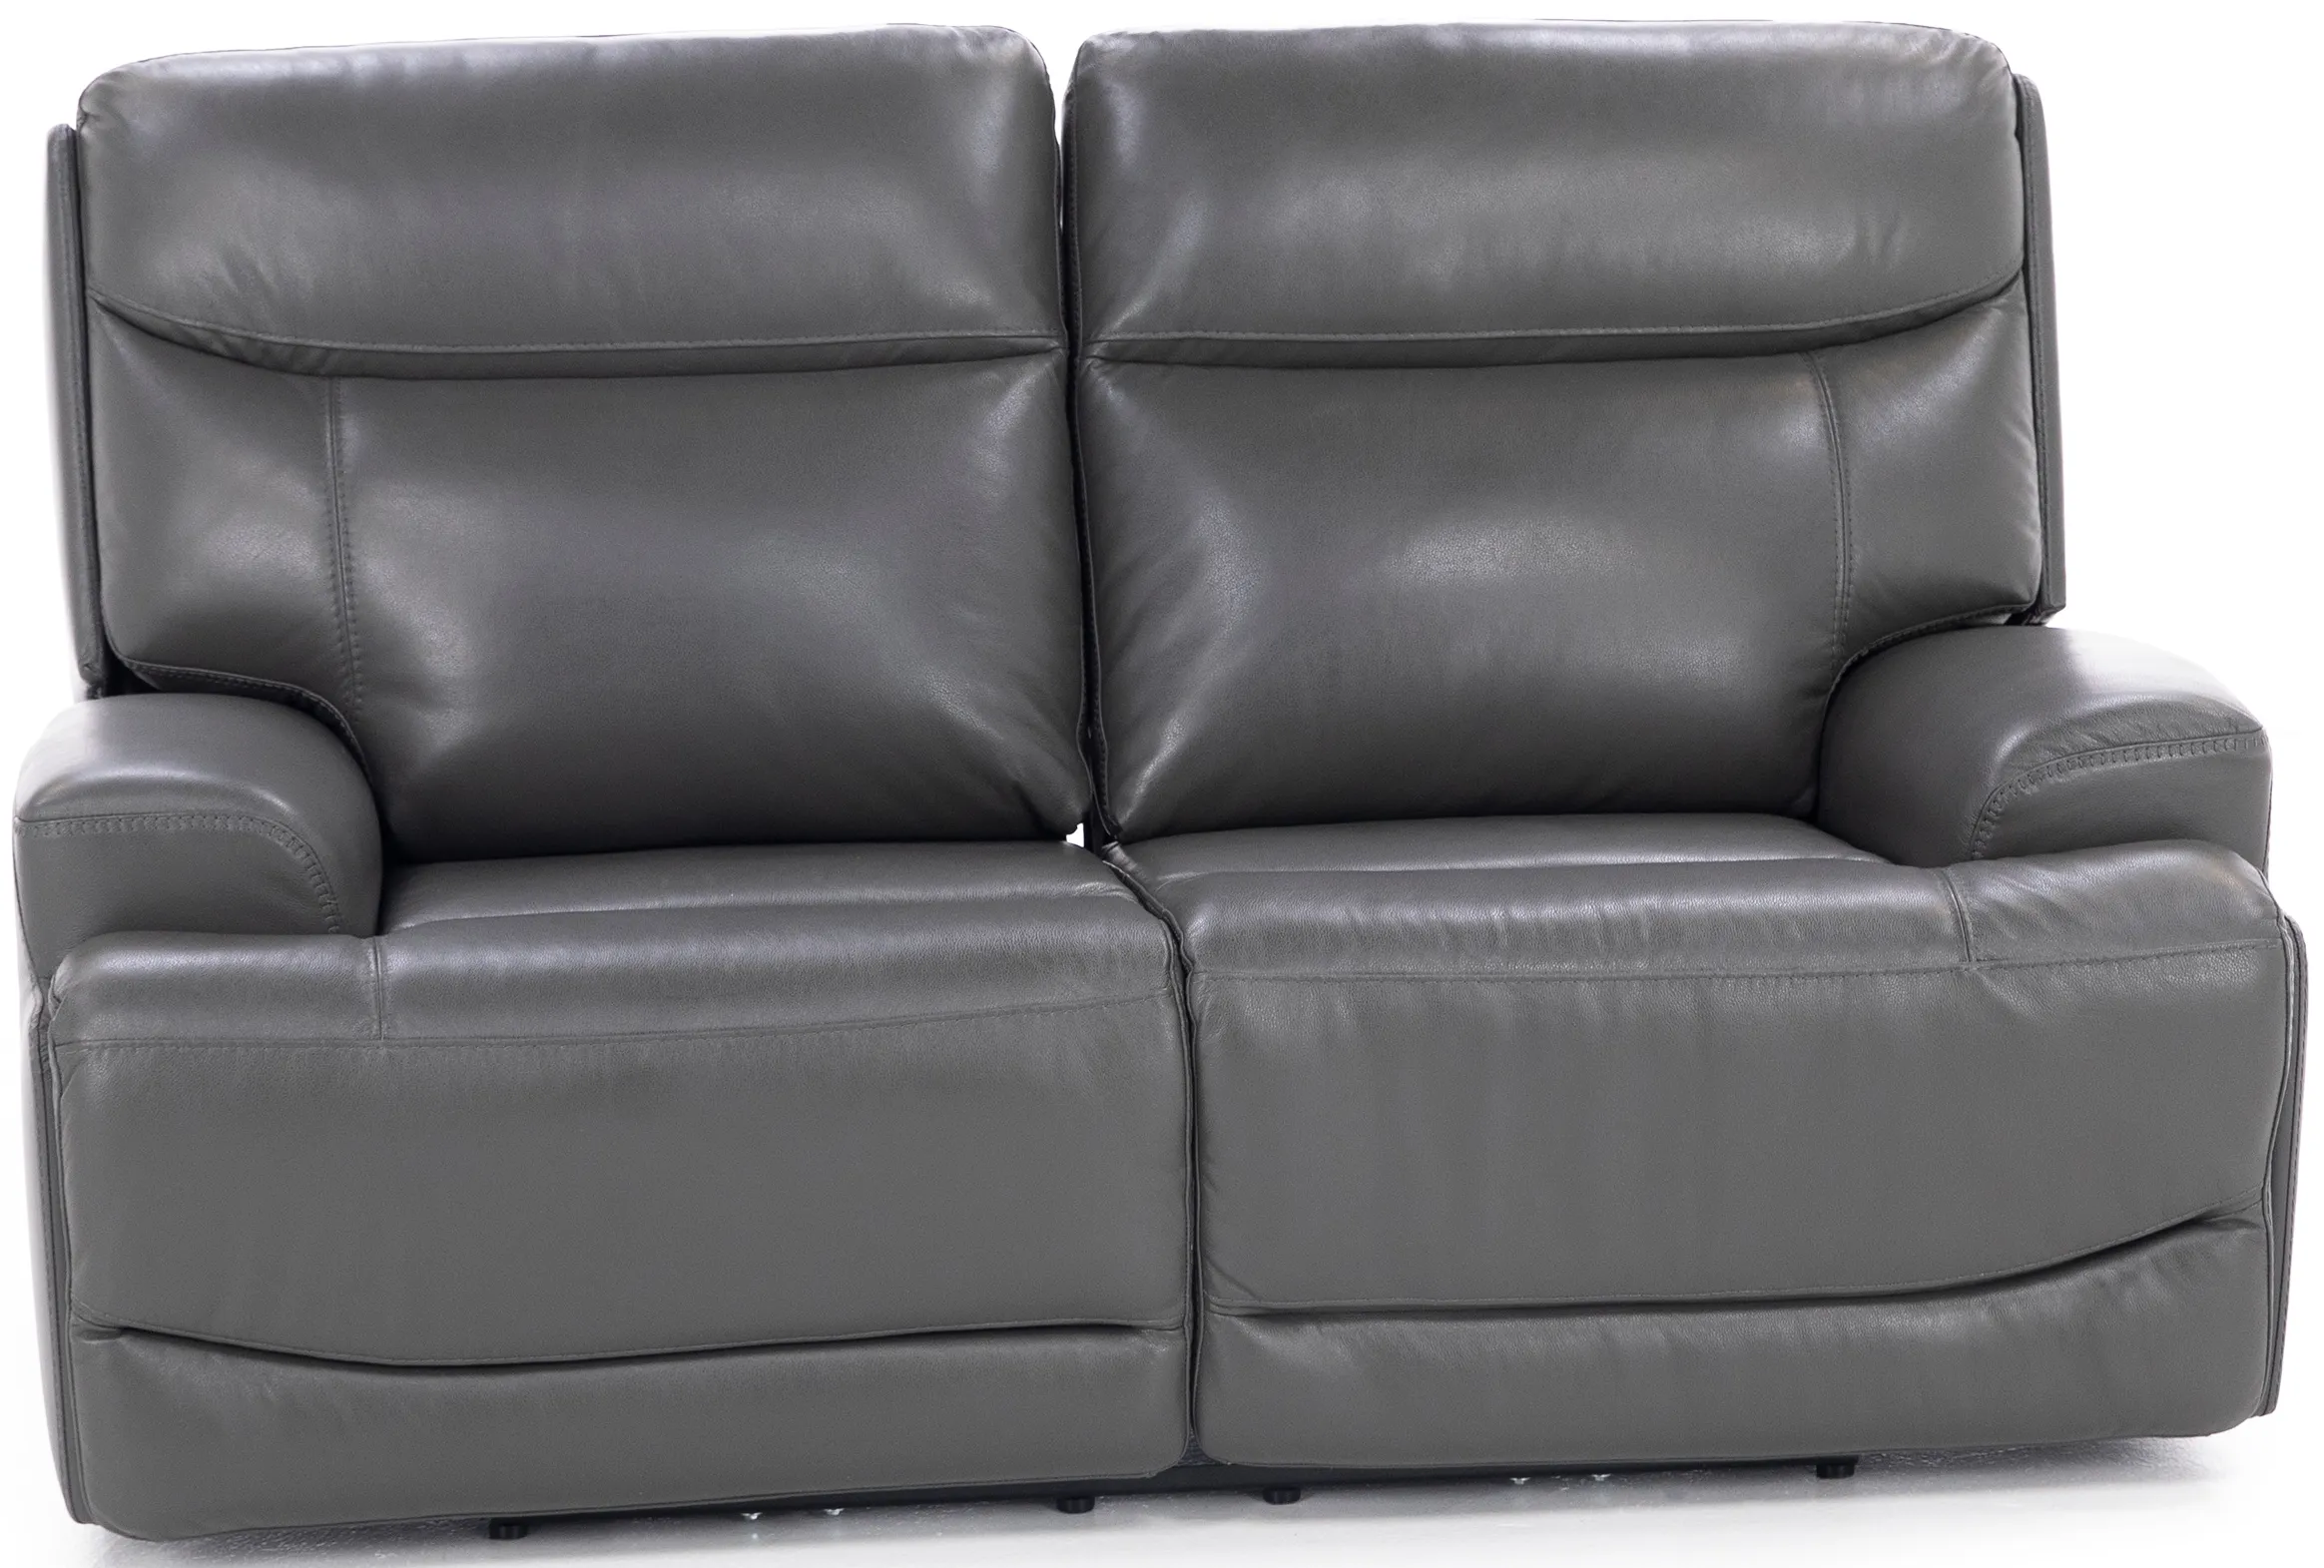 Denali Leather Fully Loaded Reclining Loveseat with Air Massage and Heat